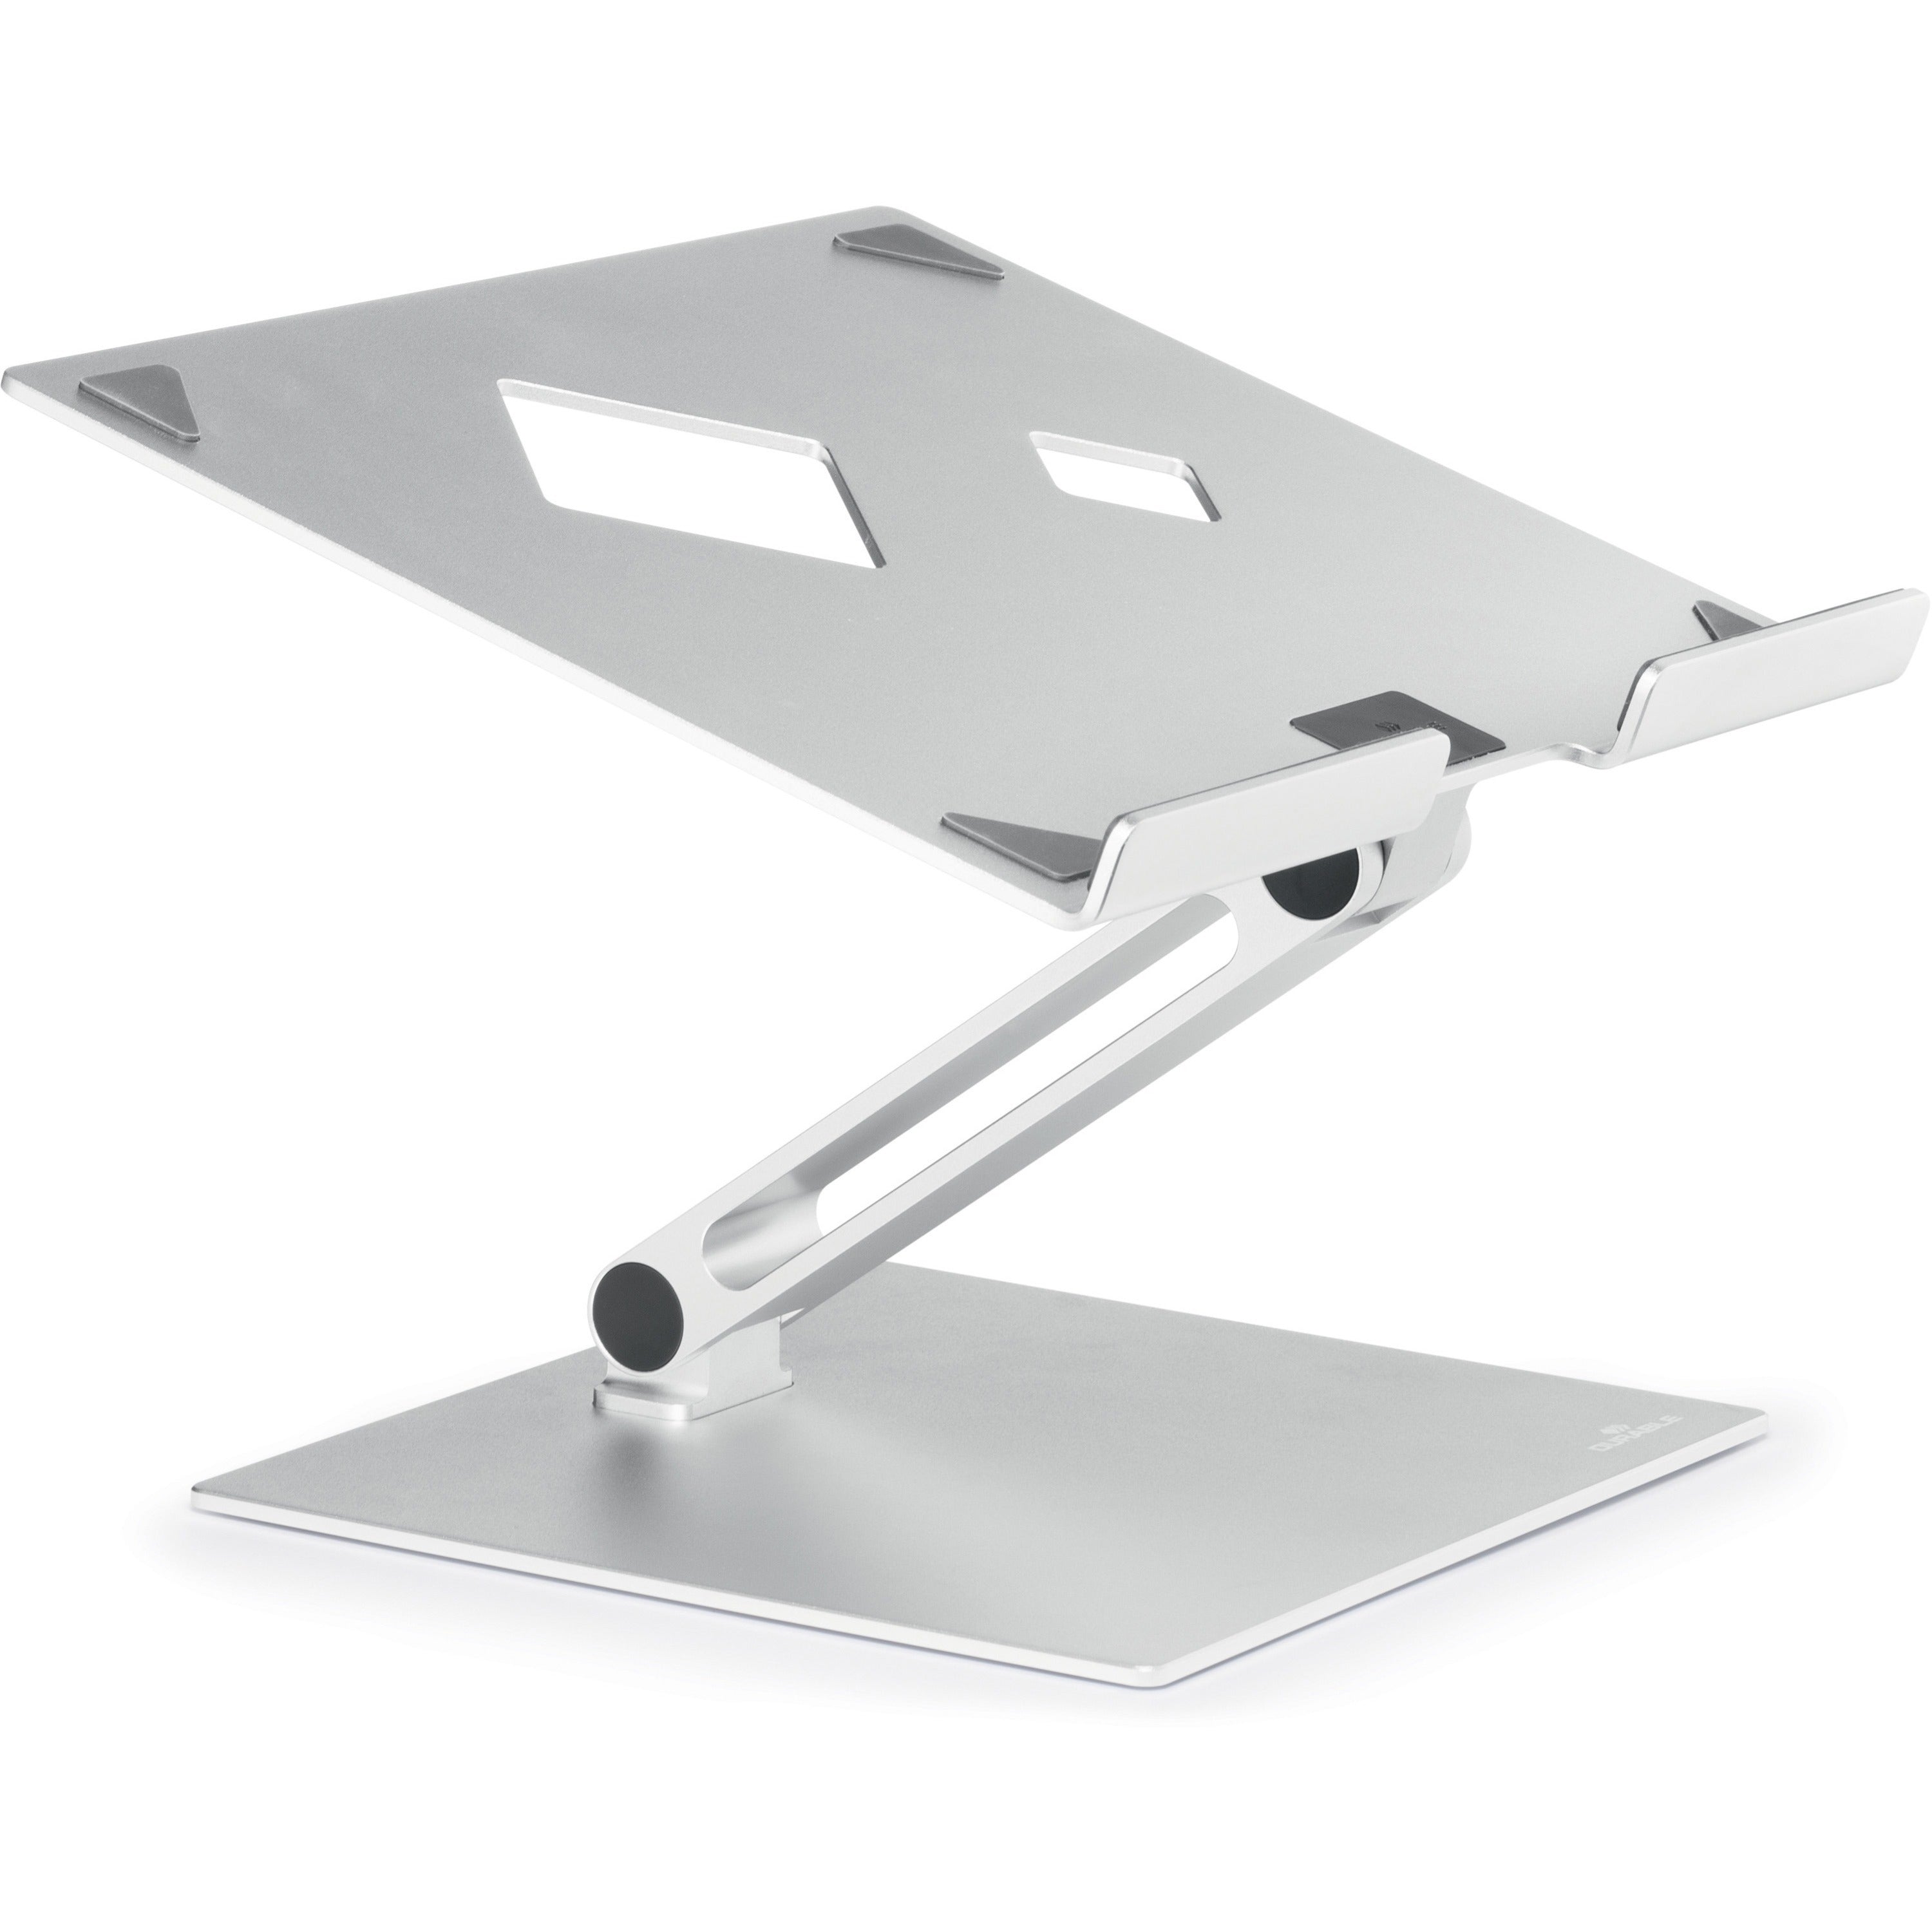 durable-rise-laptop-stand-up-to-17-screen-support-126-height-x-91-width-x-11-depth-desktop-tabletop-aluminum-silver_dbl505023 - 1